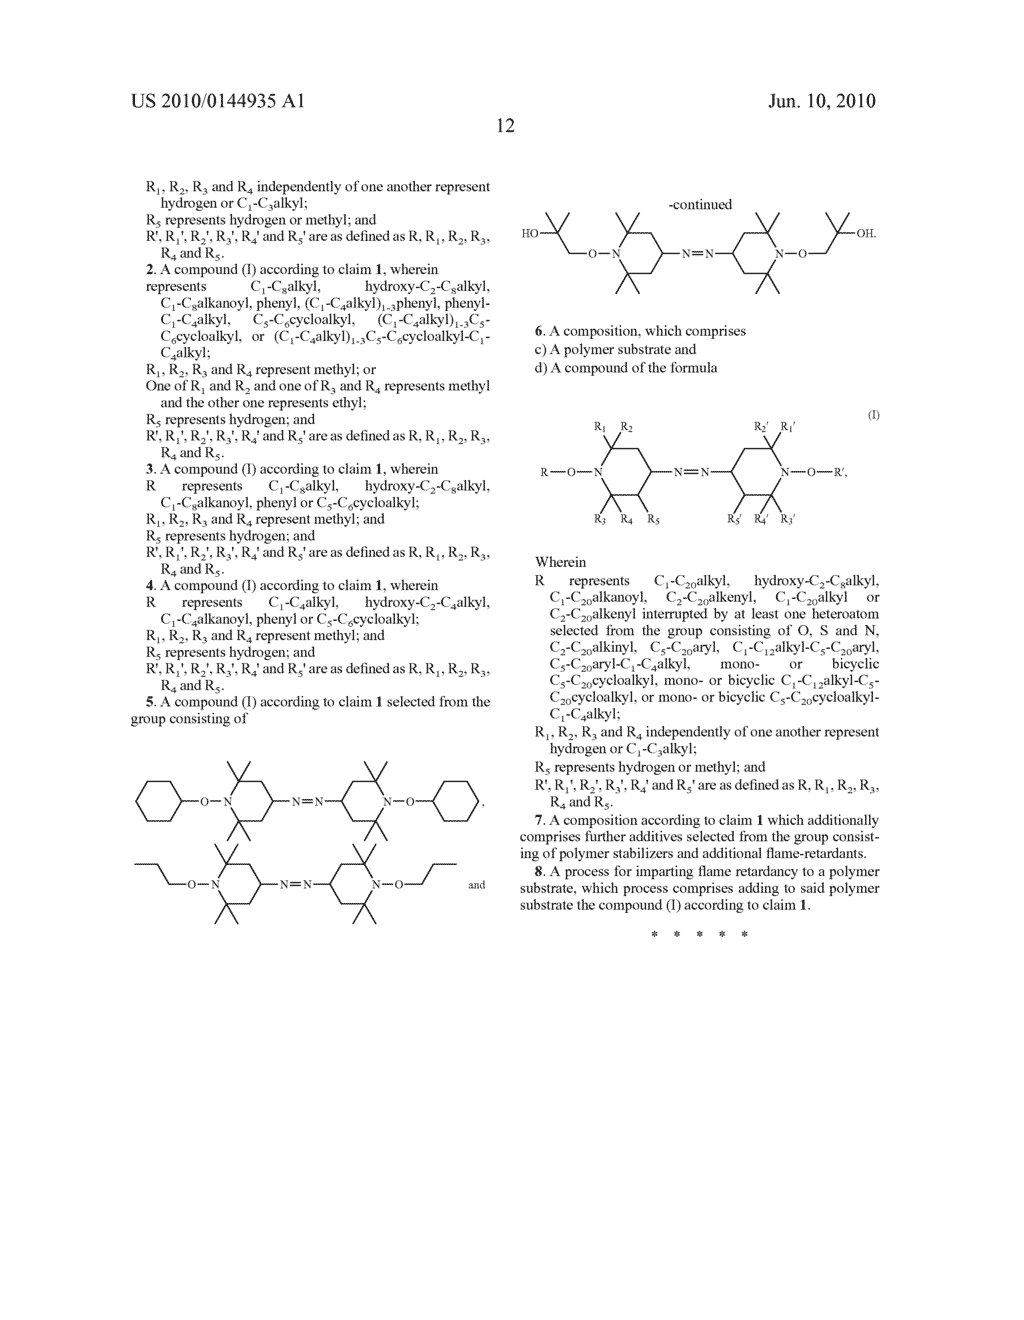 SYMMETRIC AZO COMPOUNDS IN FLAME RETARDANT COMPOSITIONS - diagram, schematic, and image 13